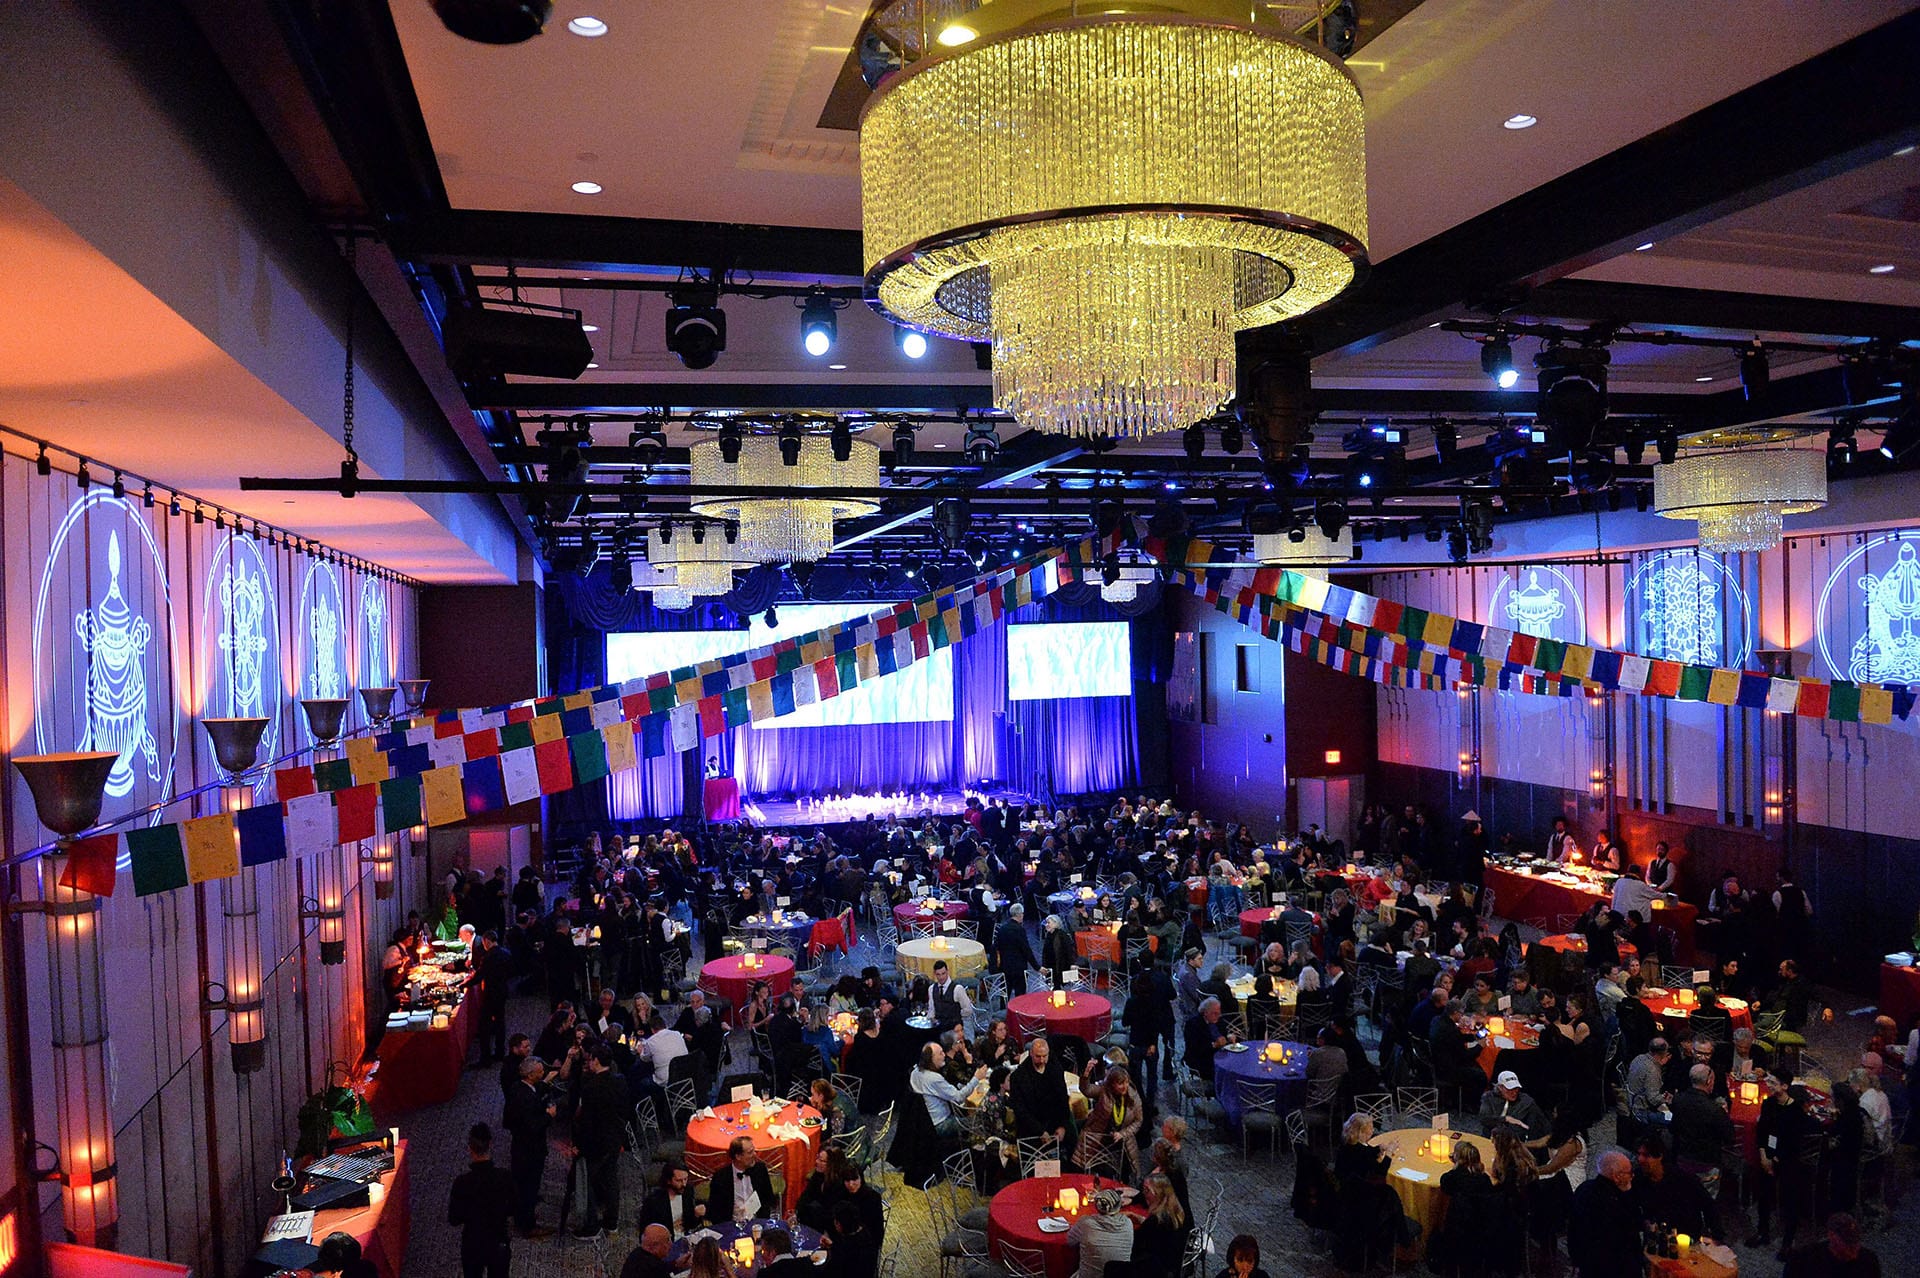 NEW YORK, NEW YORK - FEBRUARY 26: An interior view of the 33nd Annual Tibet House US Benefit Concert & Gala After Party on February 26, 2020 in New York City. (Photo by Noam Galai/Getty Images for Tibet House)